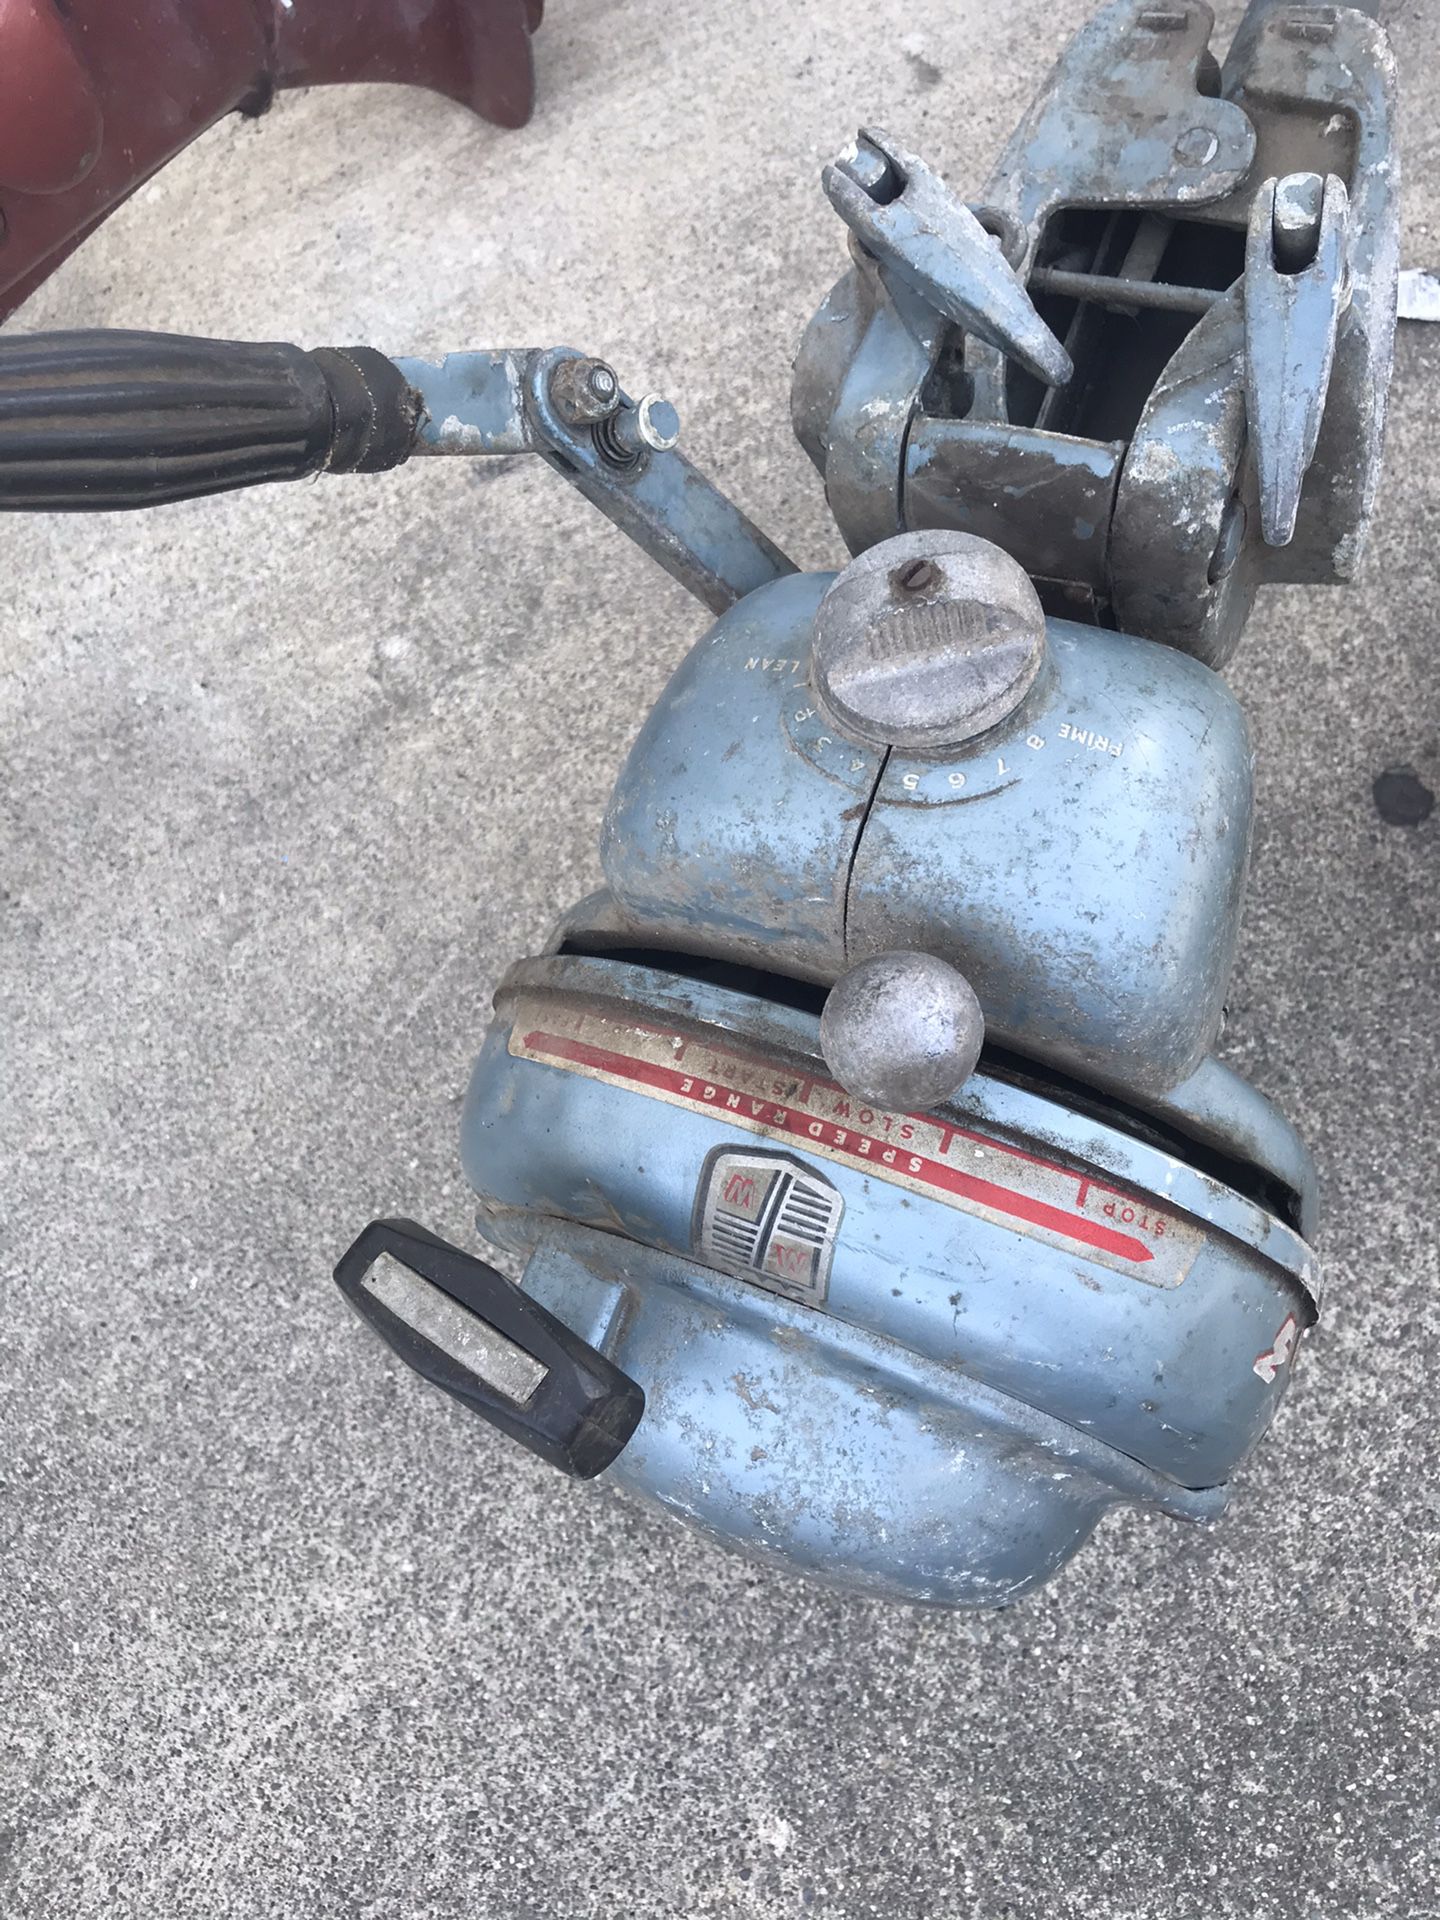 Sea king 3 boat motor for parts